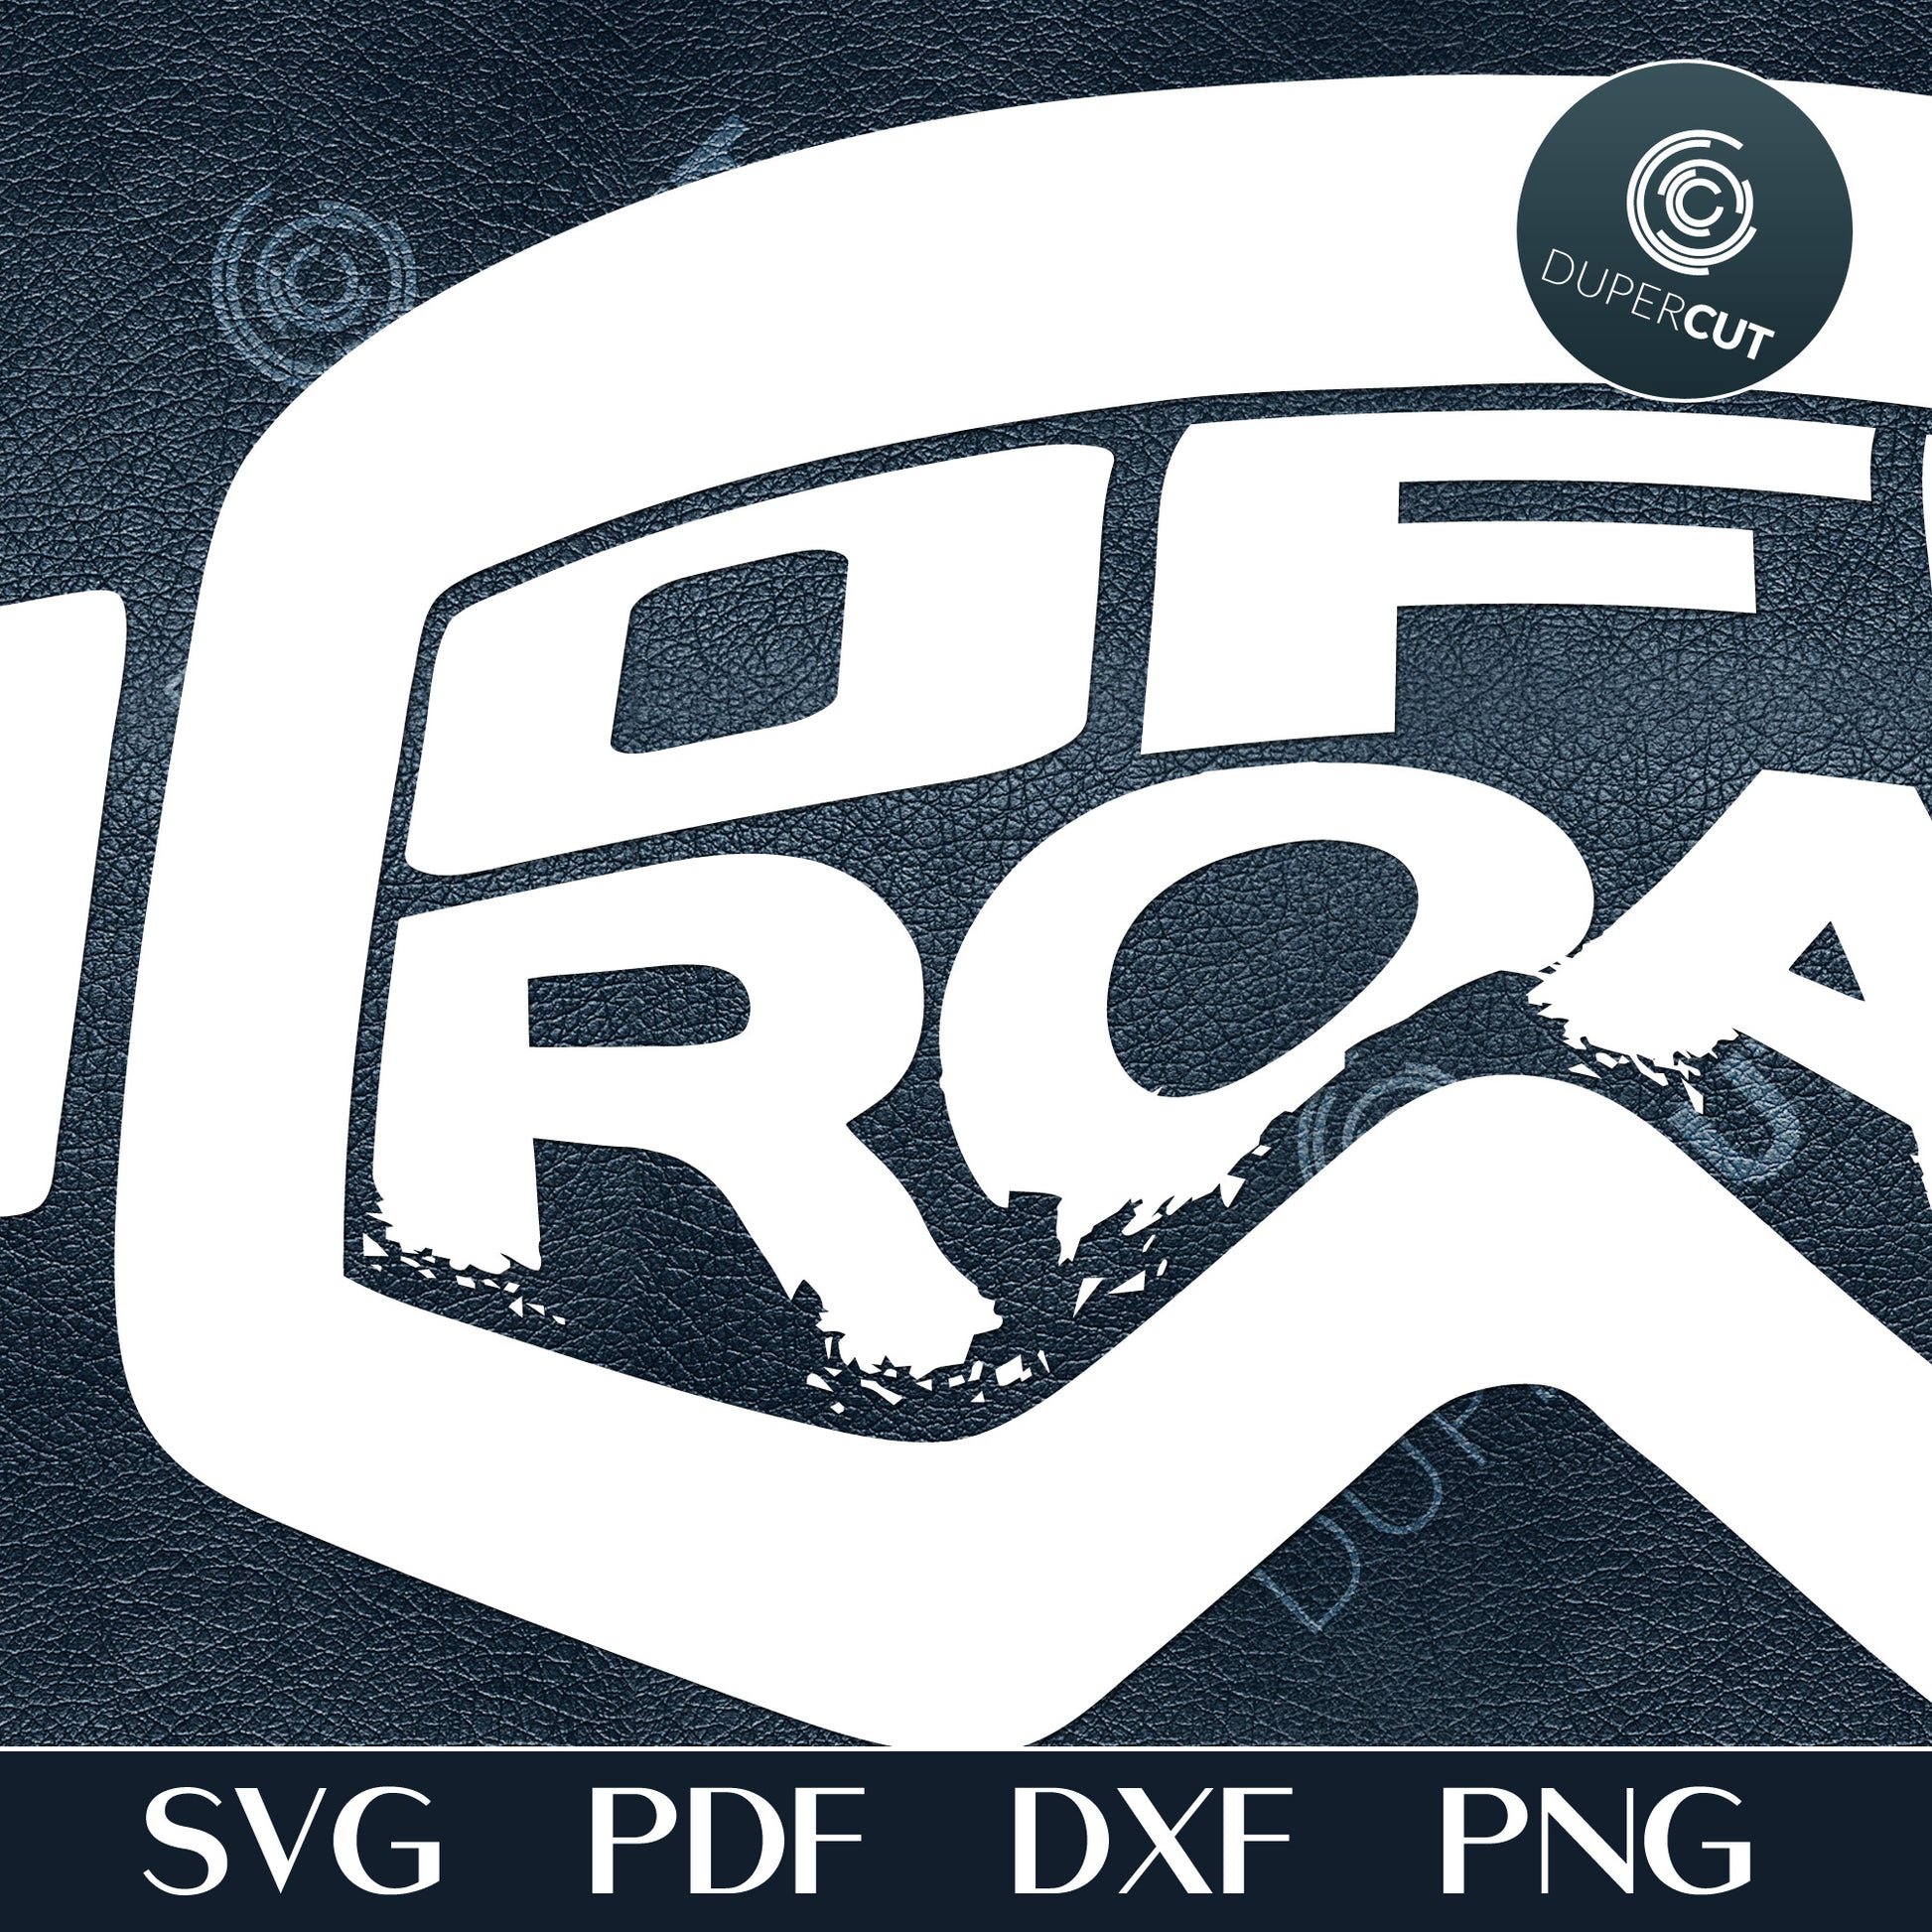 Offroad Goggles black and white design. SVG JPEG DXF files. Template for paper cutting, laser, print on demand. For use with Cricut, Glowforge, Silhouette Cameo, CNC machines. Personal or commercial license.